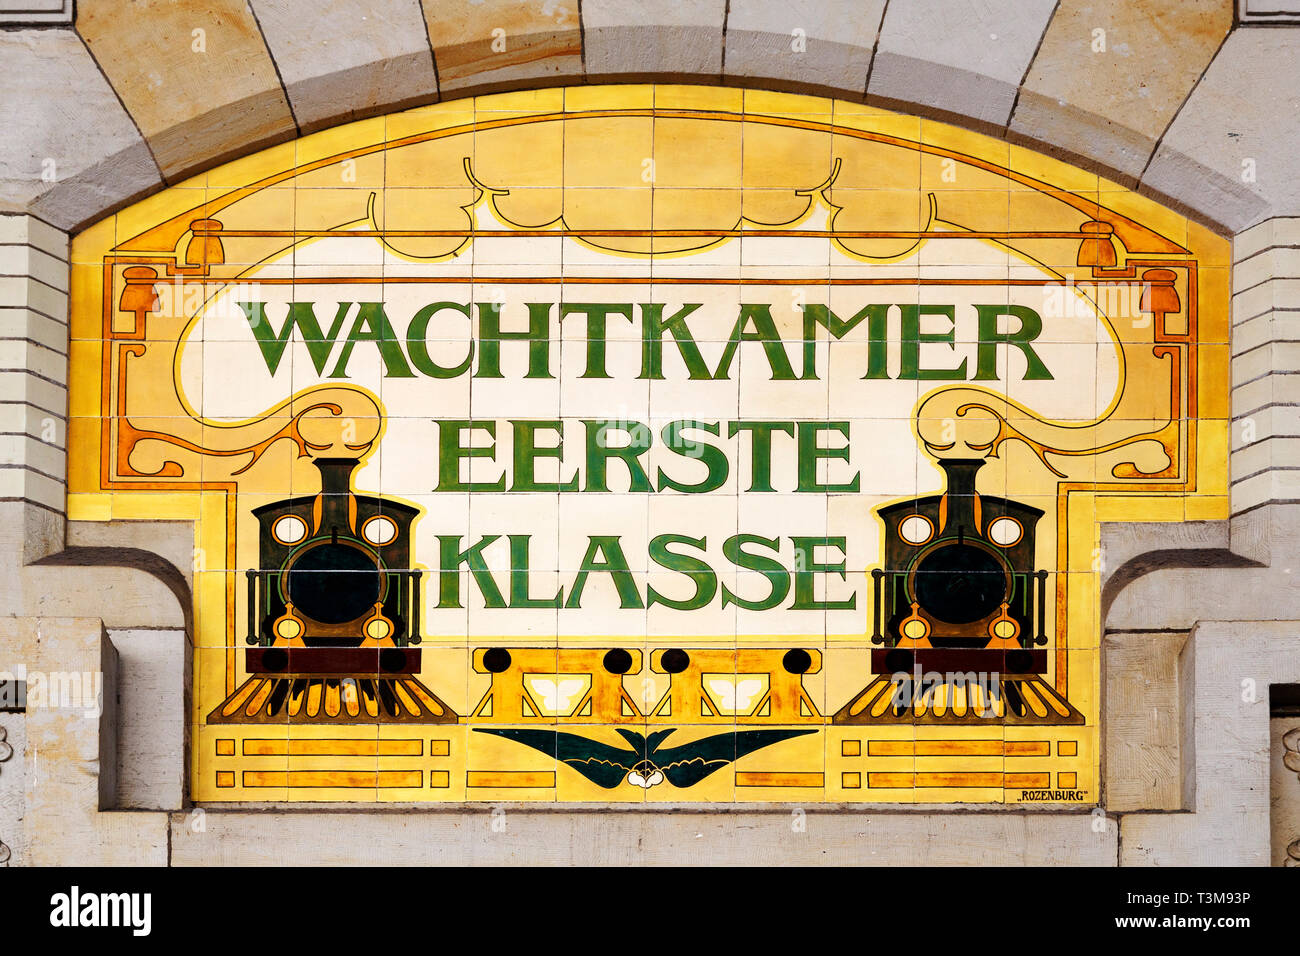 A tile sign for the first class waiting room at the railway station in Haarlem, the Netherlands. Steam locomotives are depicted on the sign. Stock Photo